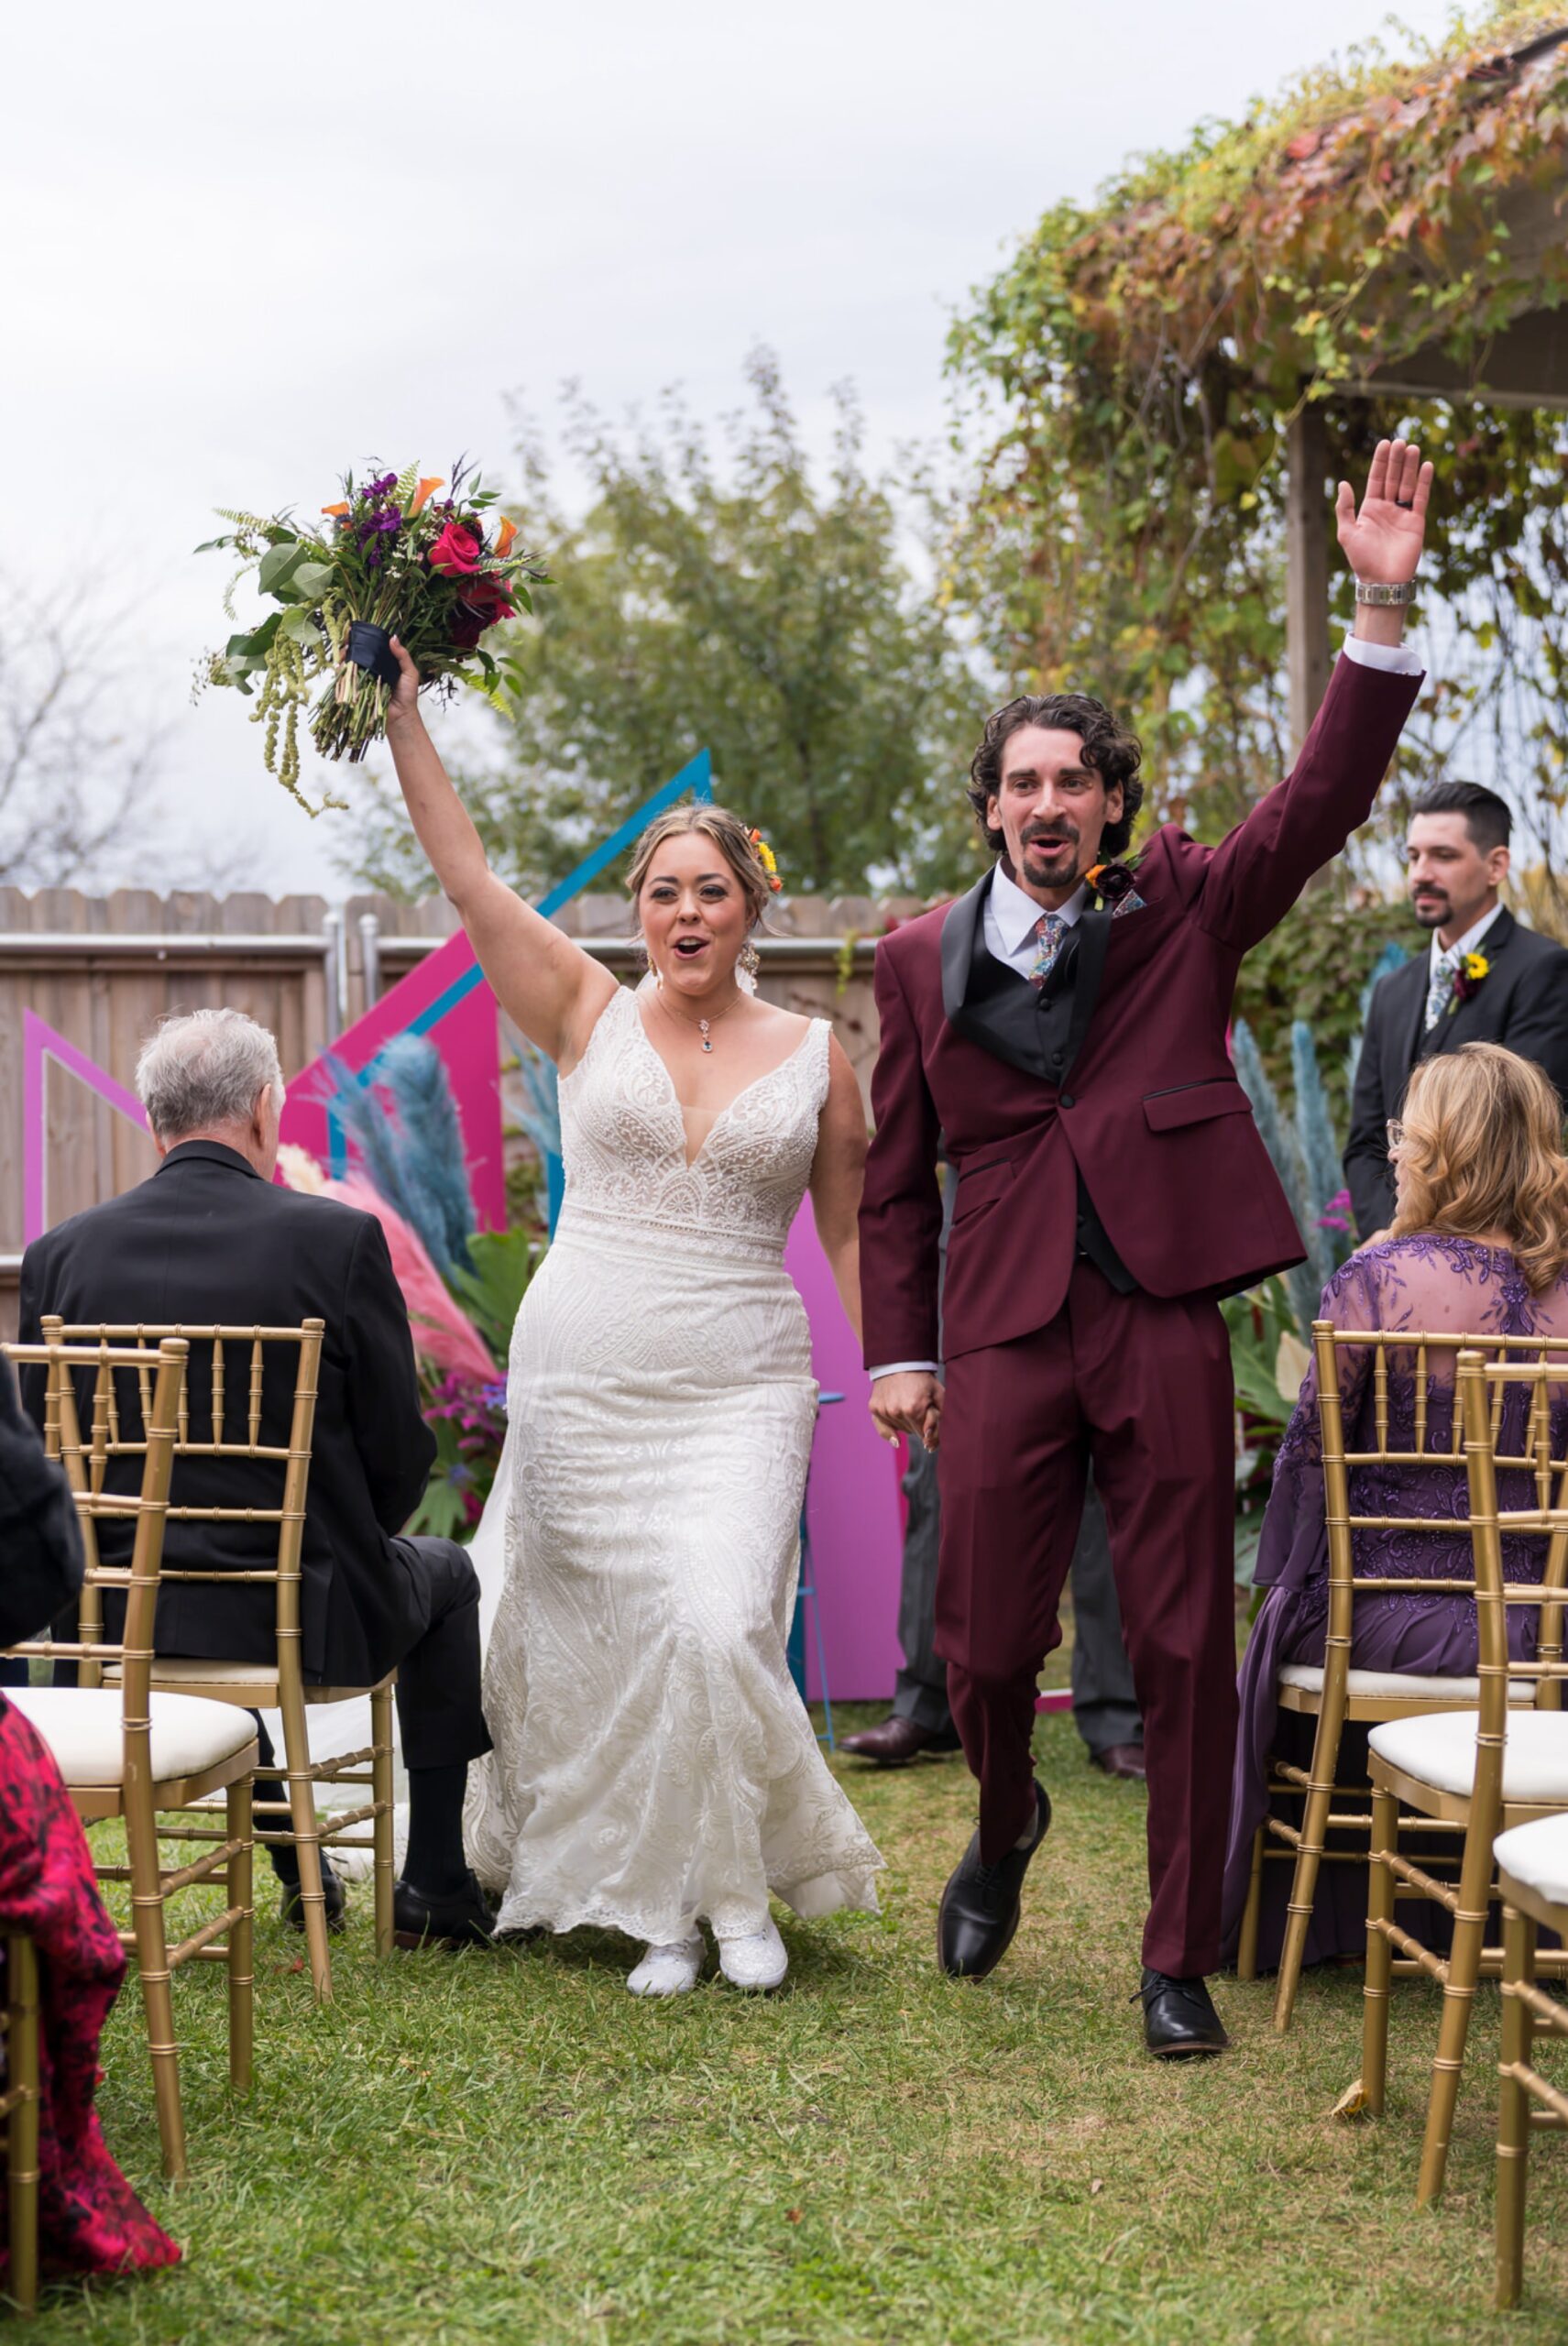 A bride and groom celebrate after being announced husband and wife at their Jam Handy wedding.  